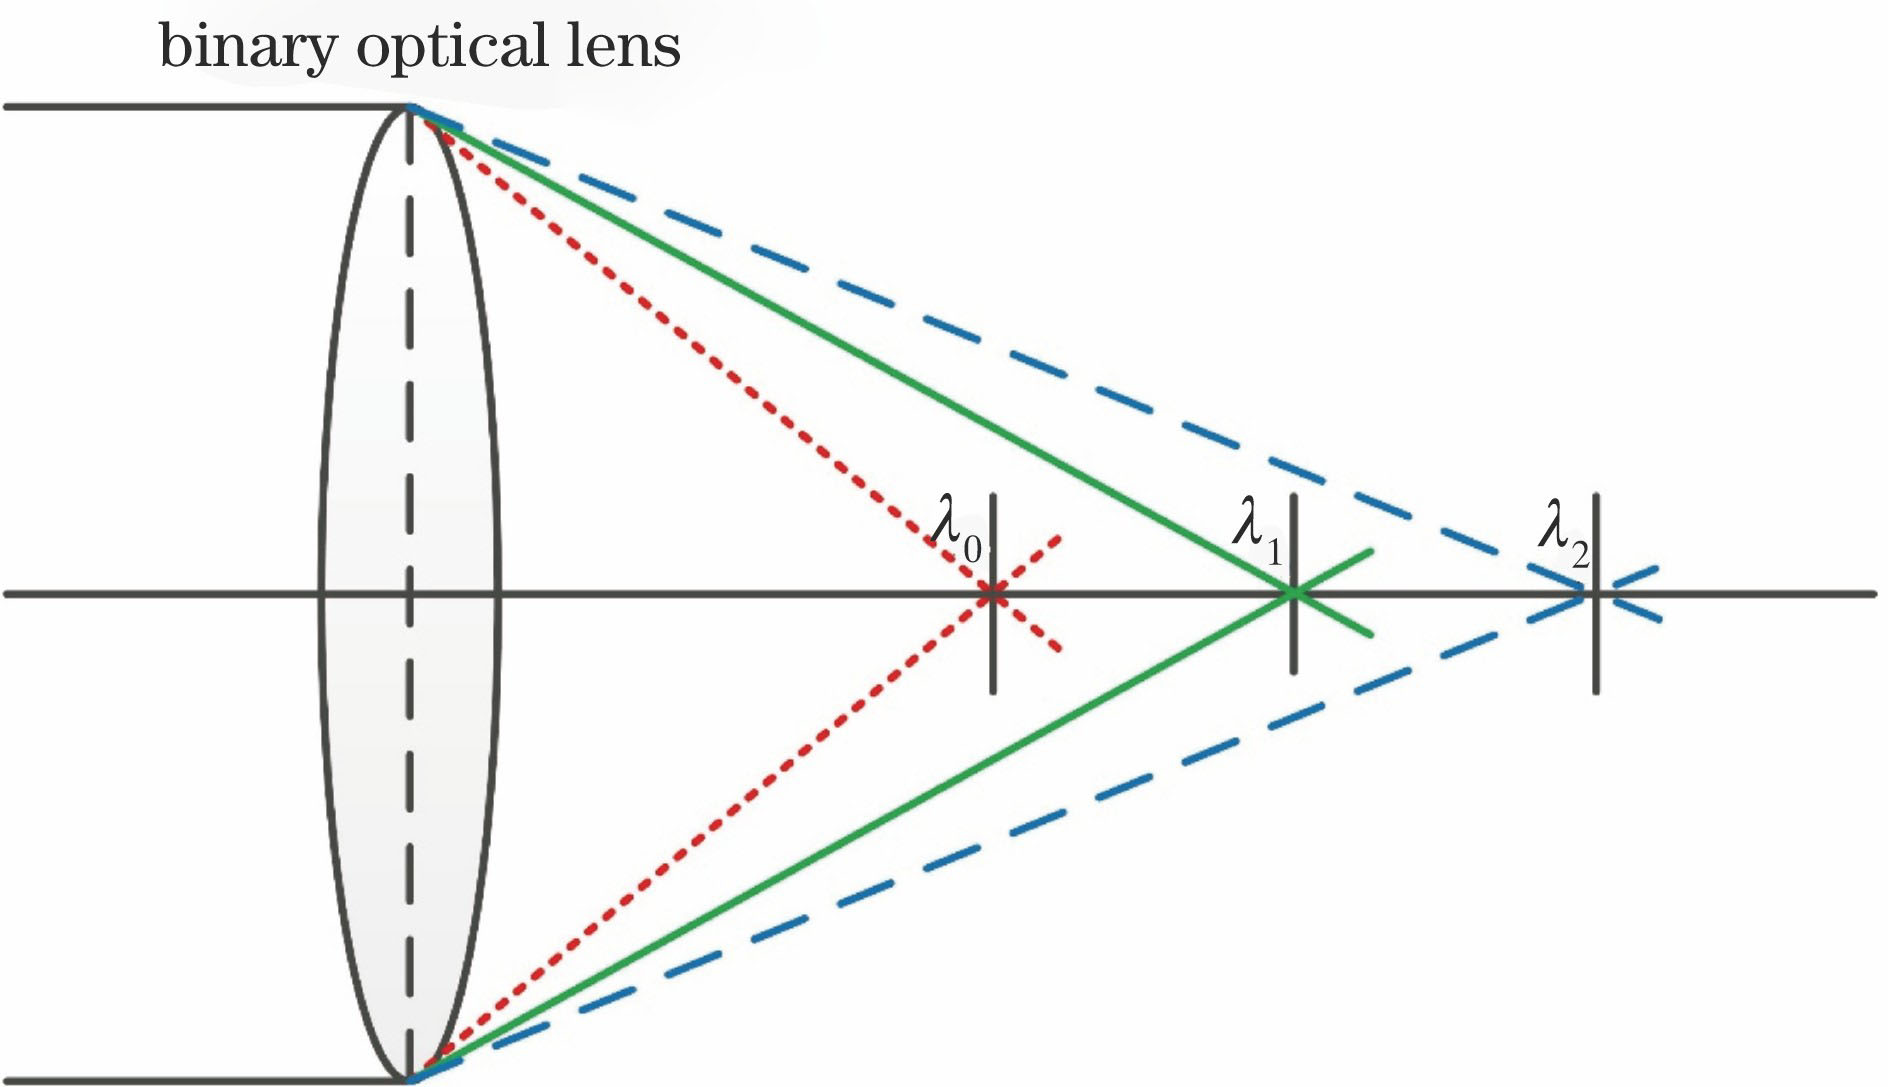 Schematic of axial dispersion of binary optical lens